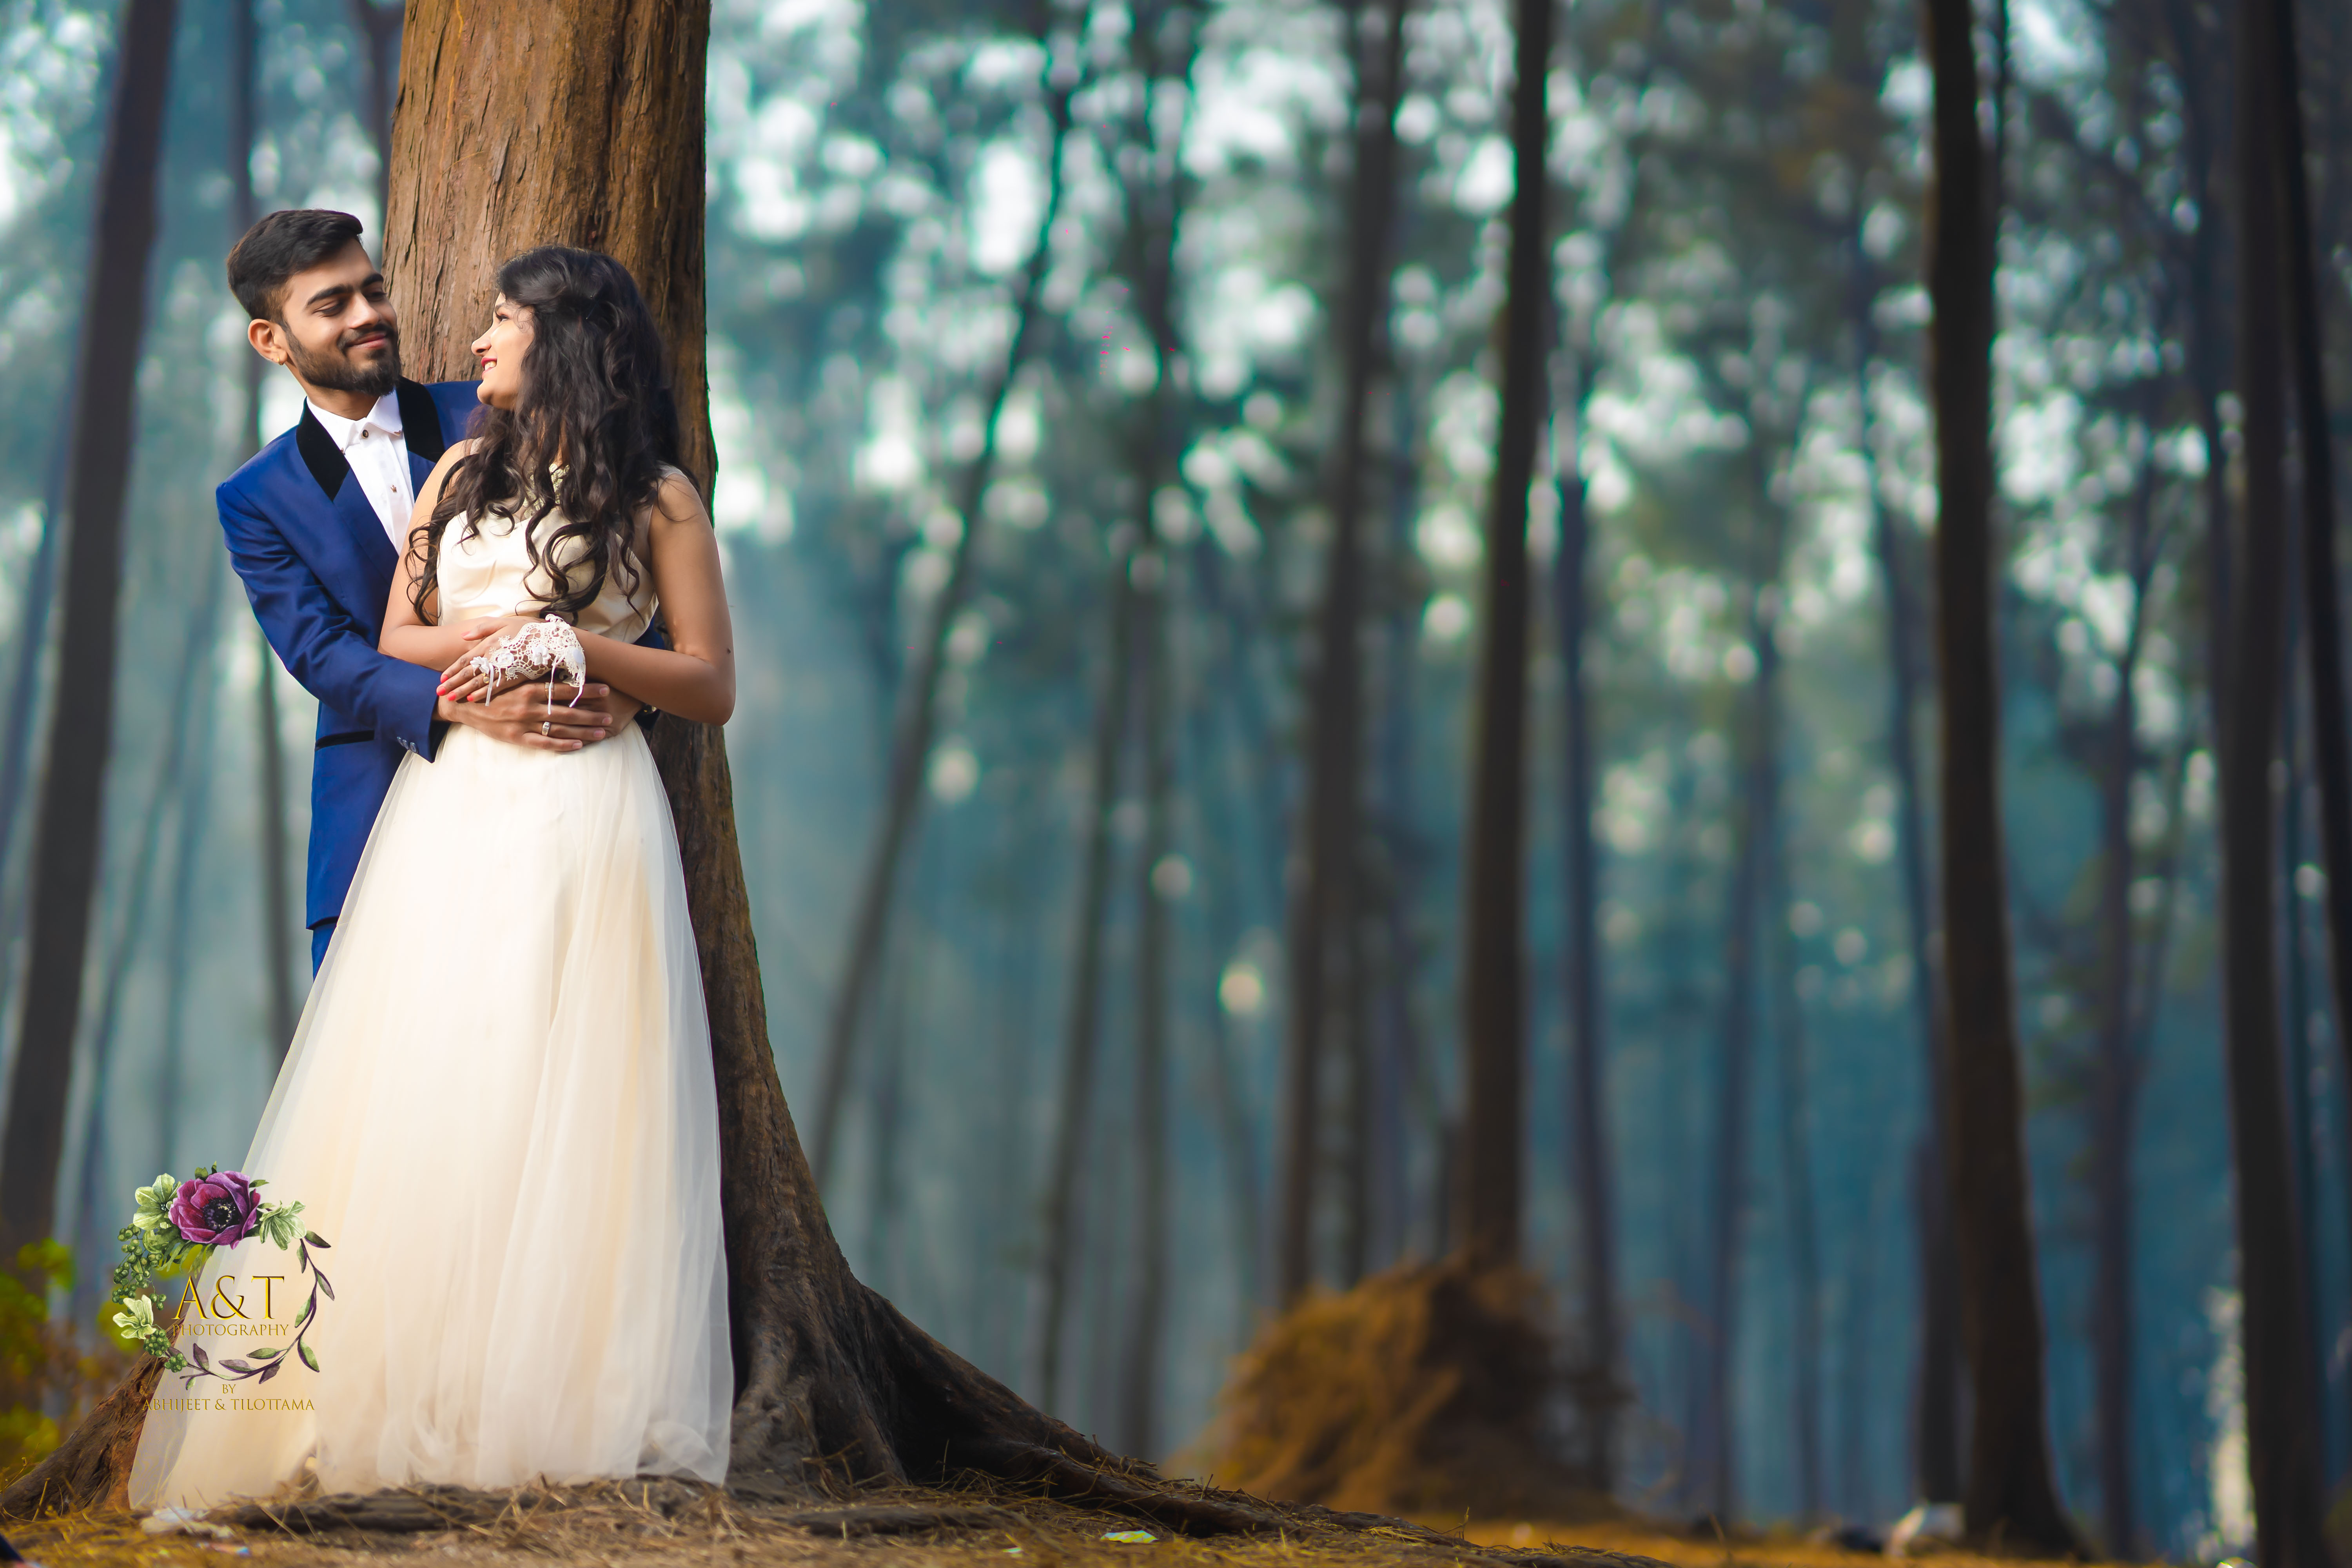 Dreamy Pre-wedding Picture from the Prewedding Photoshoot of Dharmik and Jinal at Alibaug